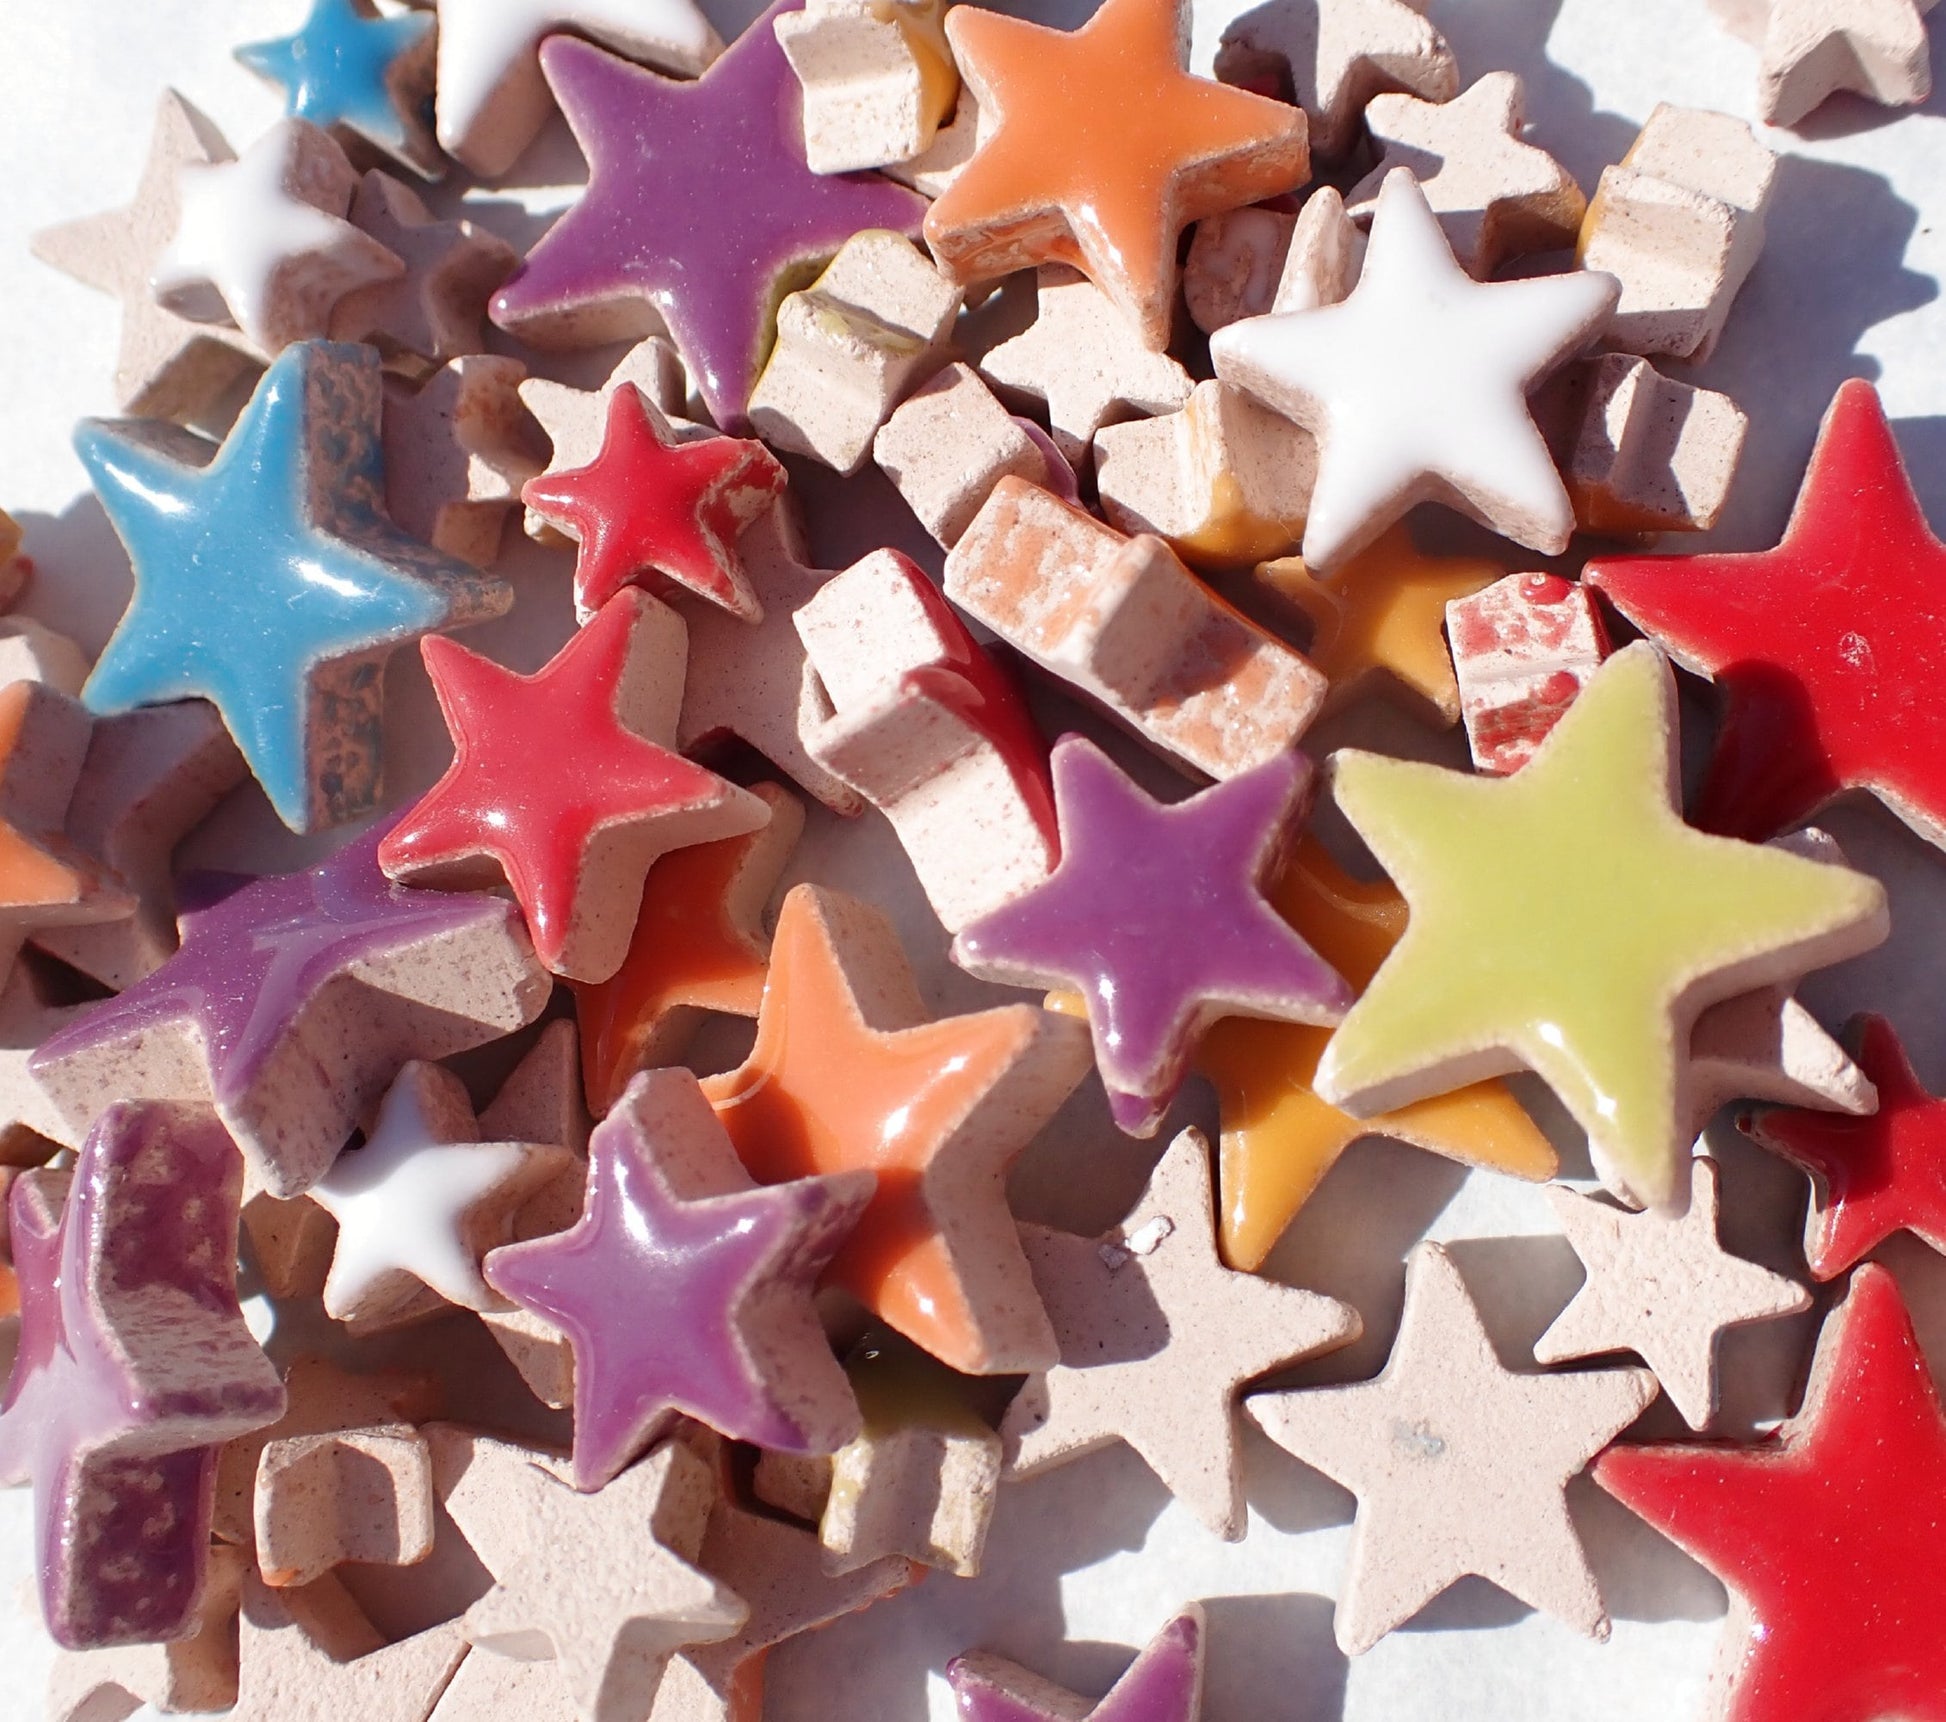 Colorful Stars Mosaic Tiles - 50g Ceramic in Mix of 3 Sizes - 20mm, 15mm, 10mm - Assorted Colors